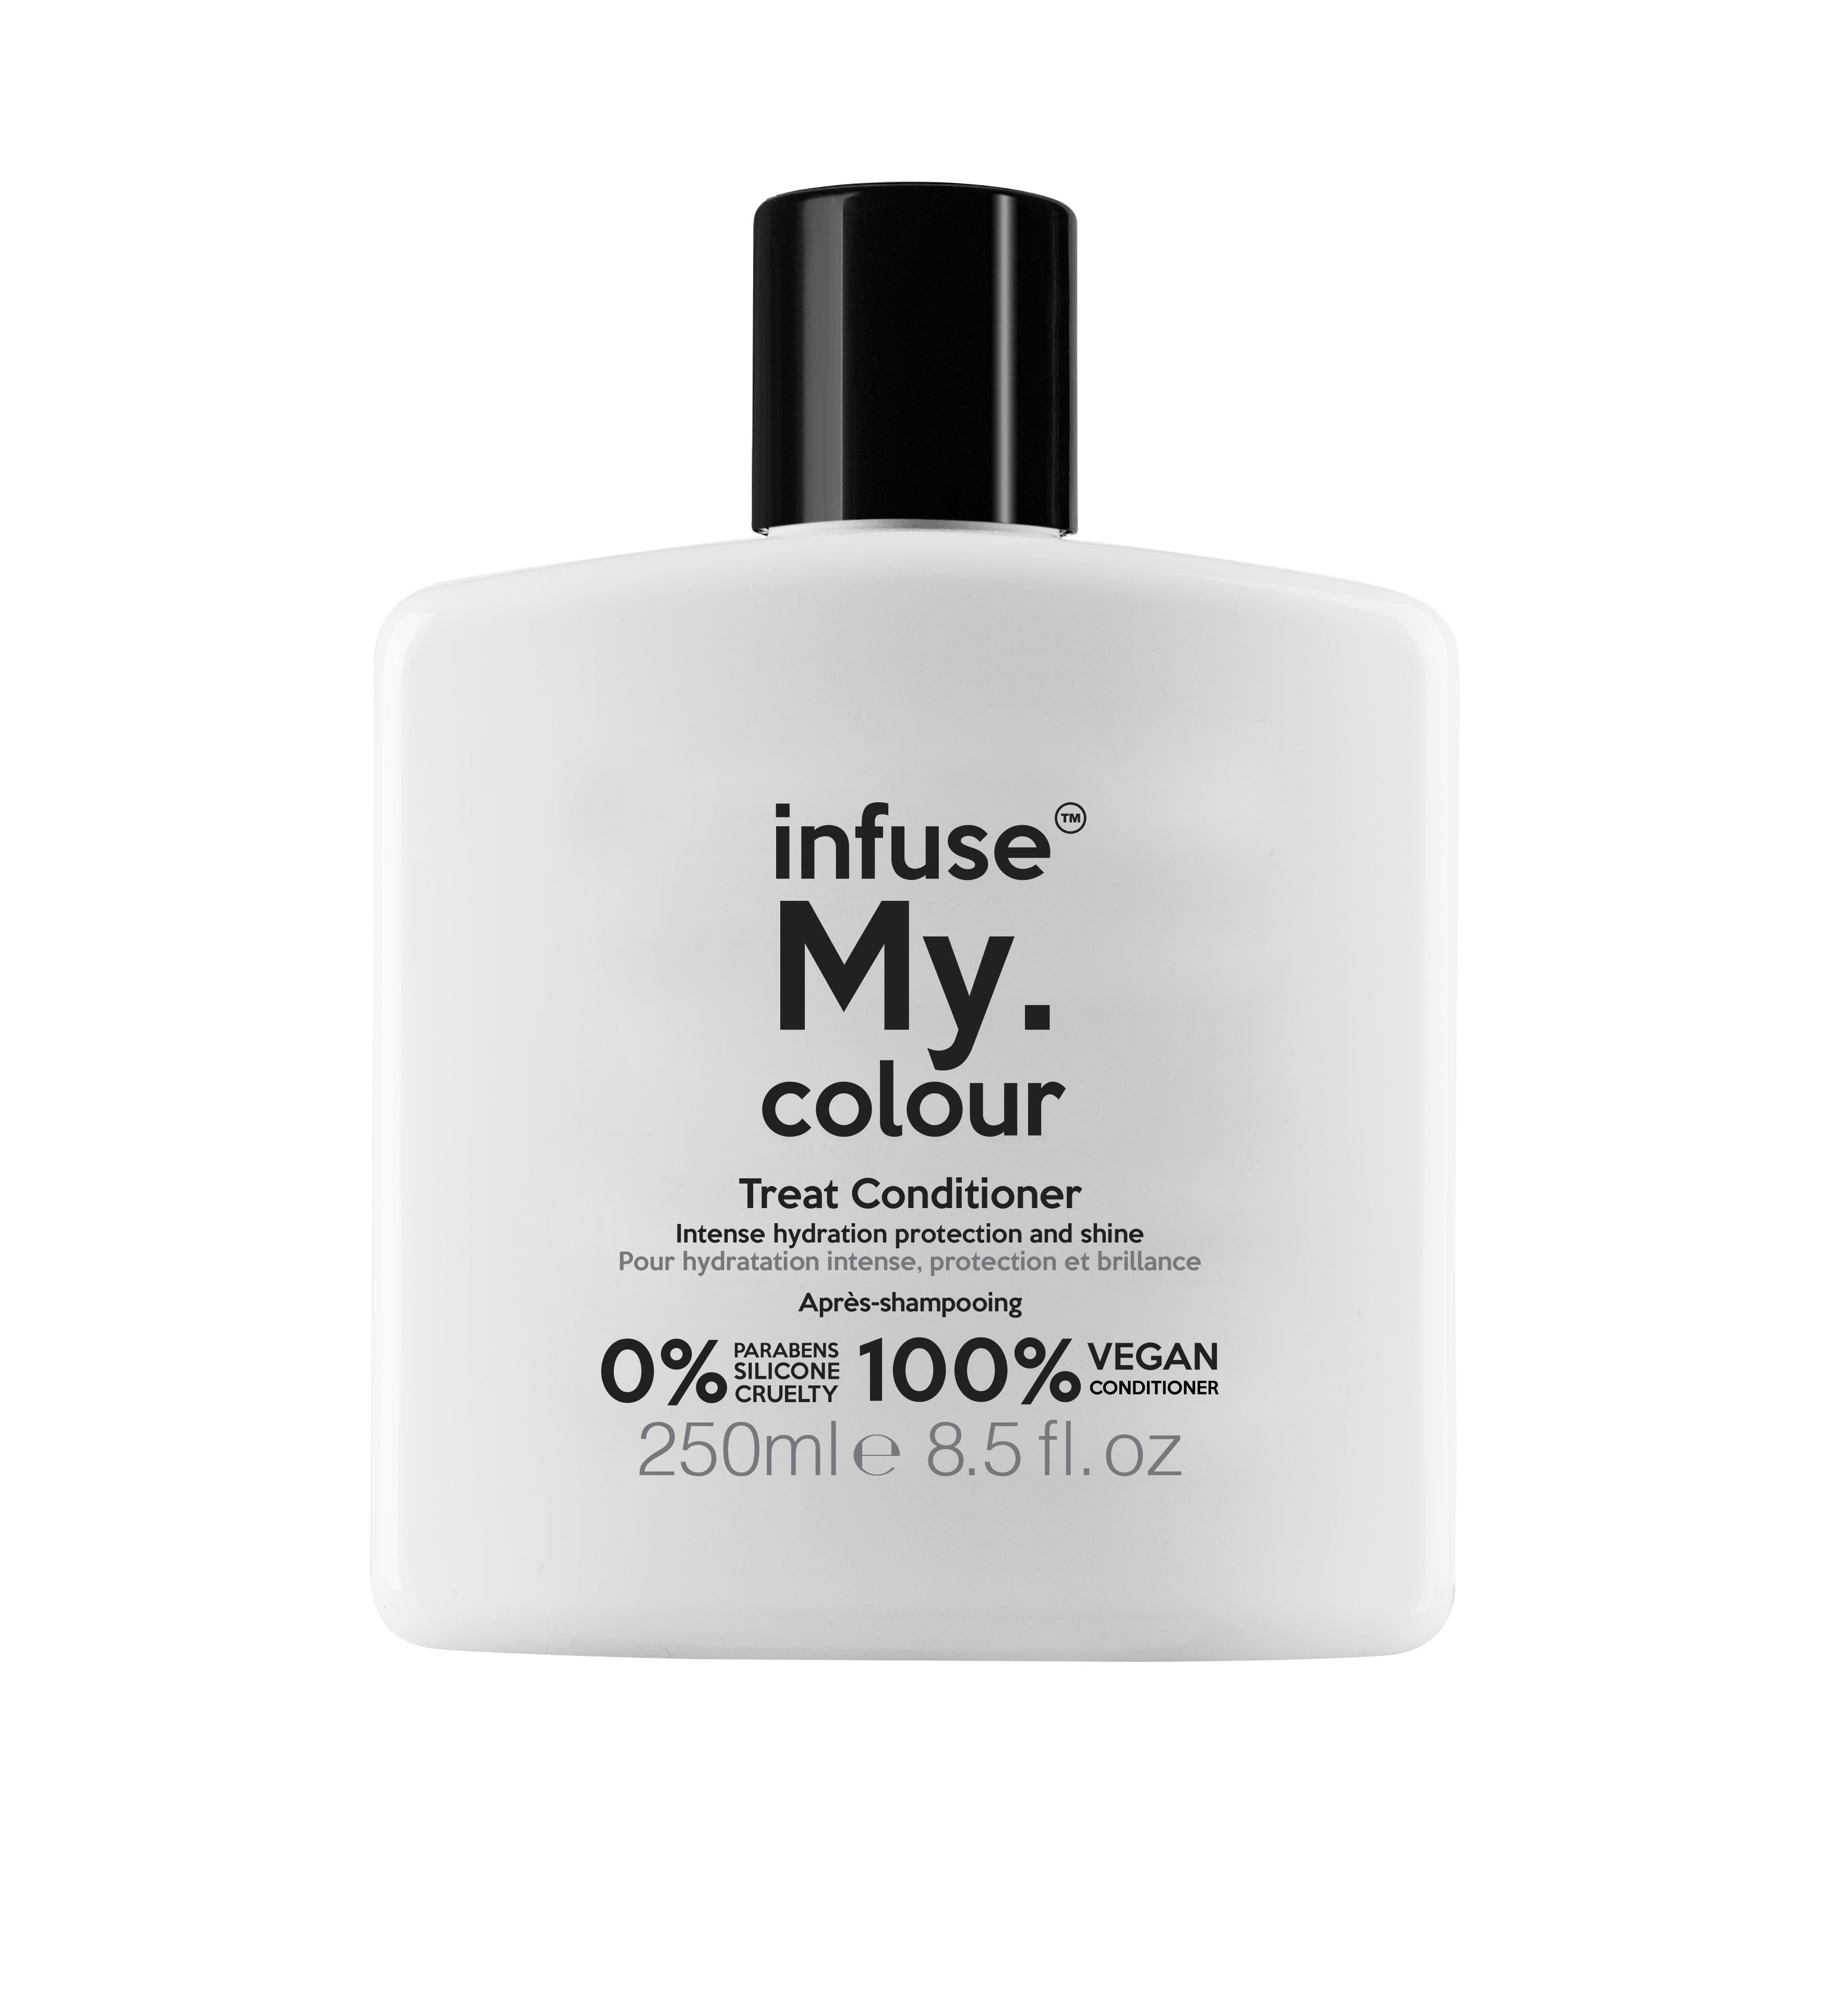 Infuse My Colour Treat Conditioner